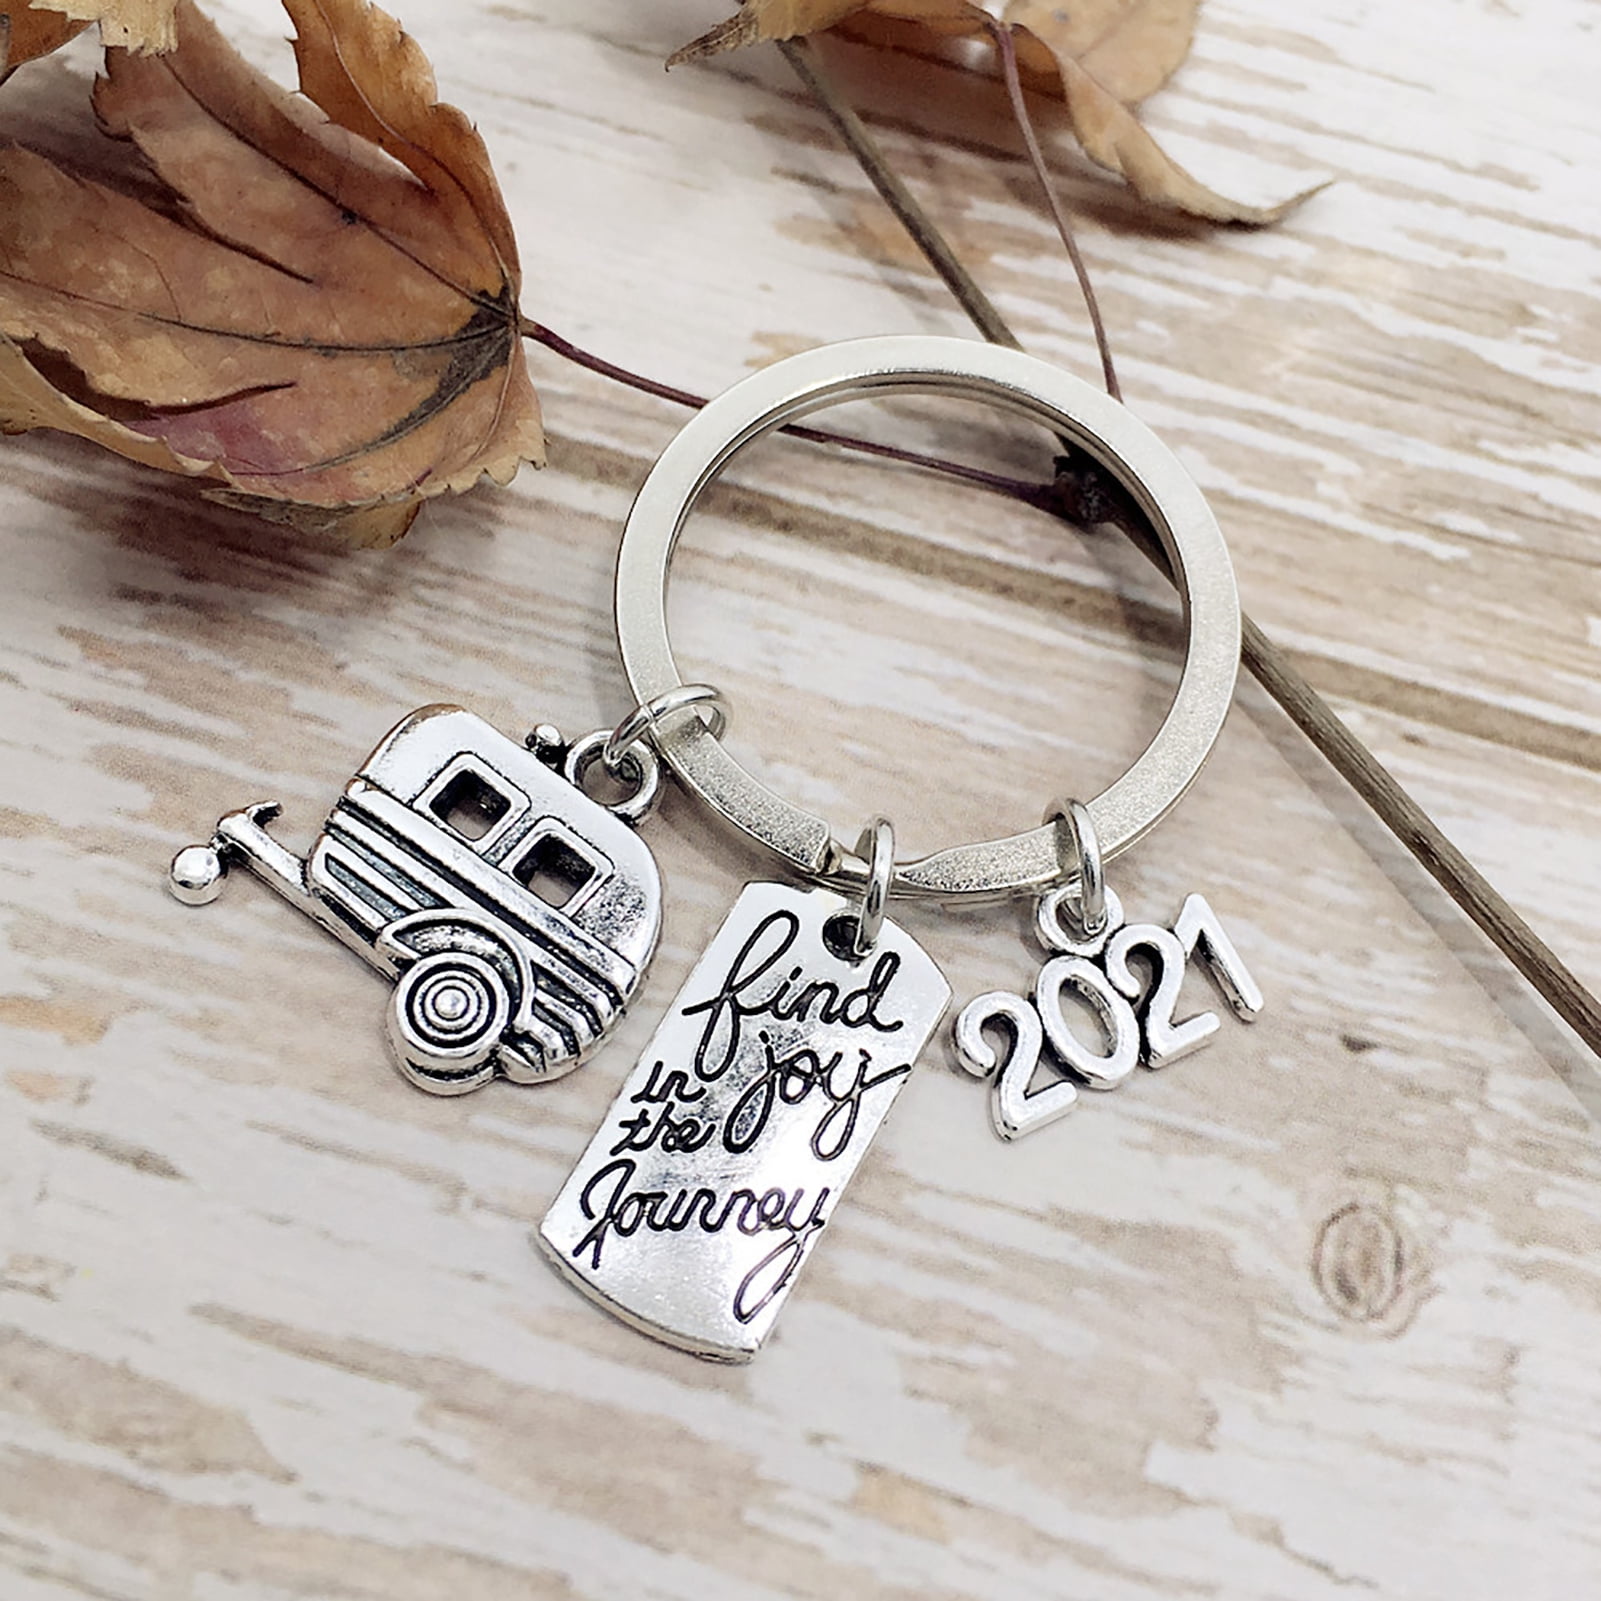 Details about   To My Daughter A Letters Keychain DIY Car Keyring Stainless Steel Jewelry Gifts 